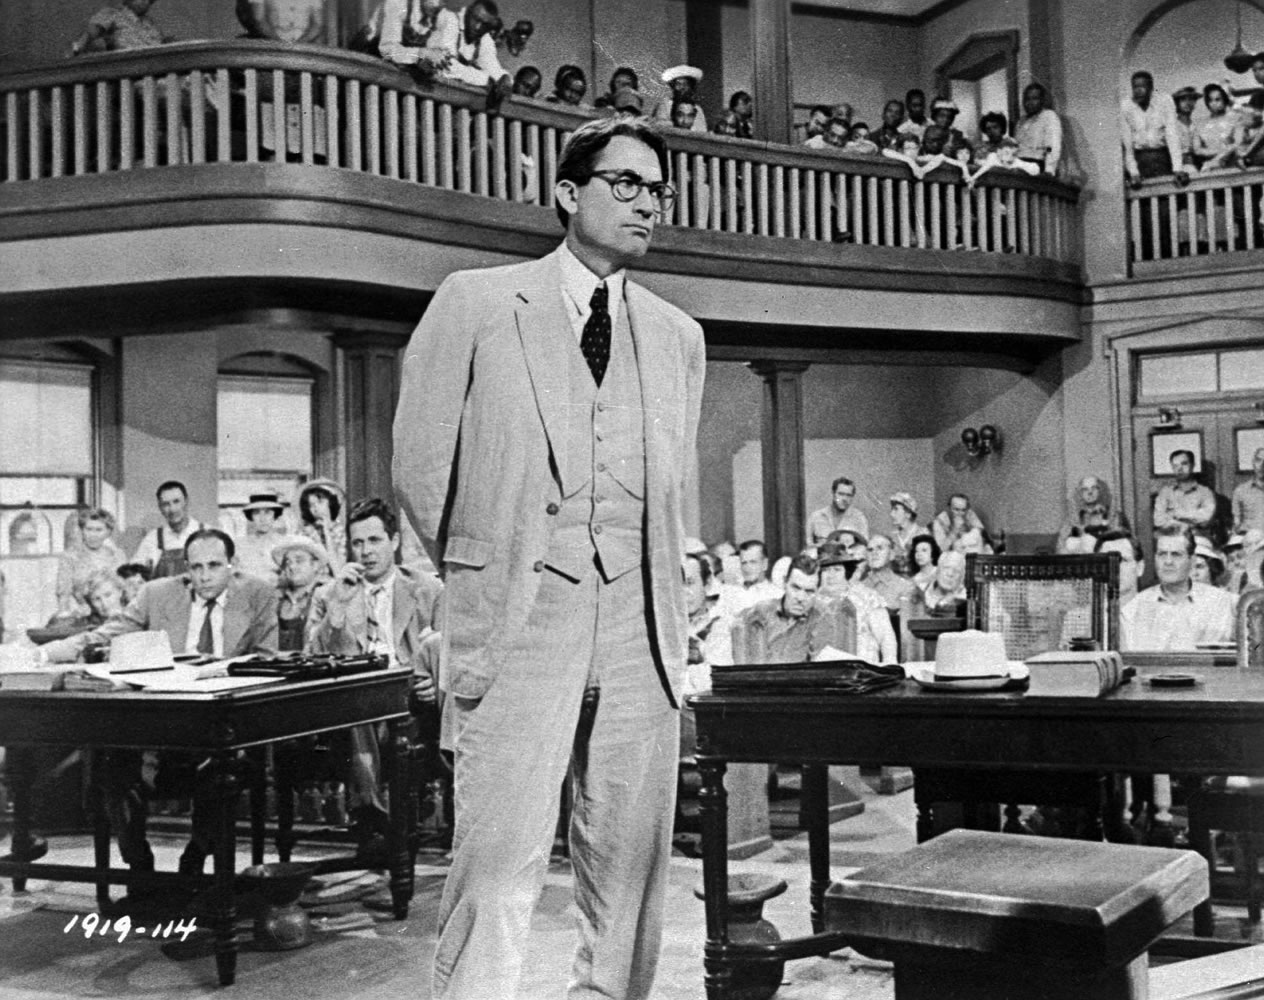 Universal
Actor Gregory Peck portrays attorney Atticus Finch in 1962 film version of&quot;To Kill a Mockingbird,&quot; based on the novel by Harper Lee.